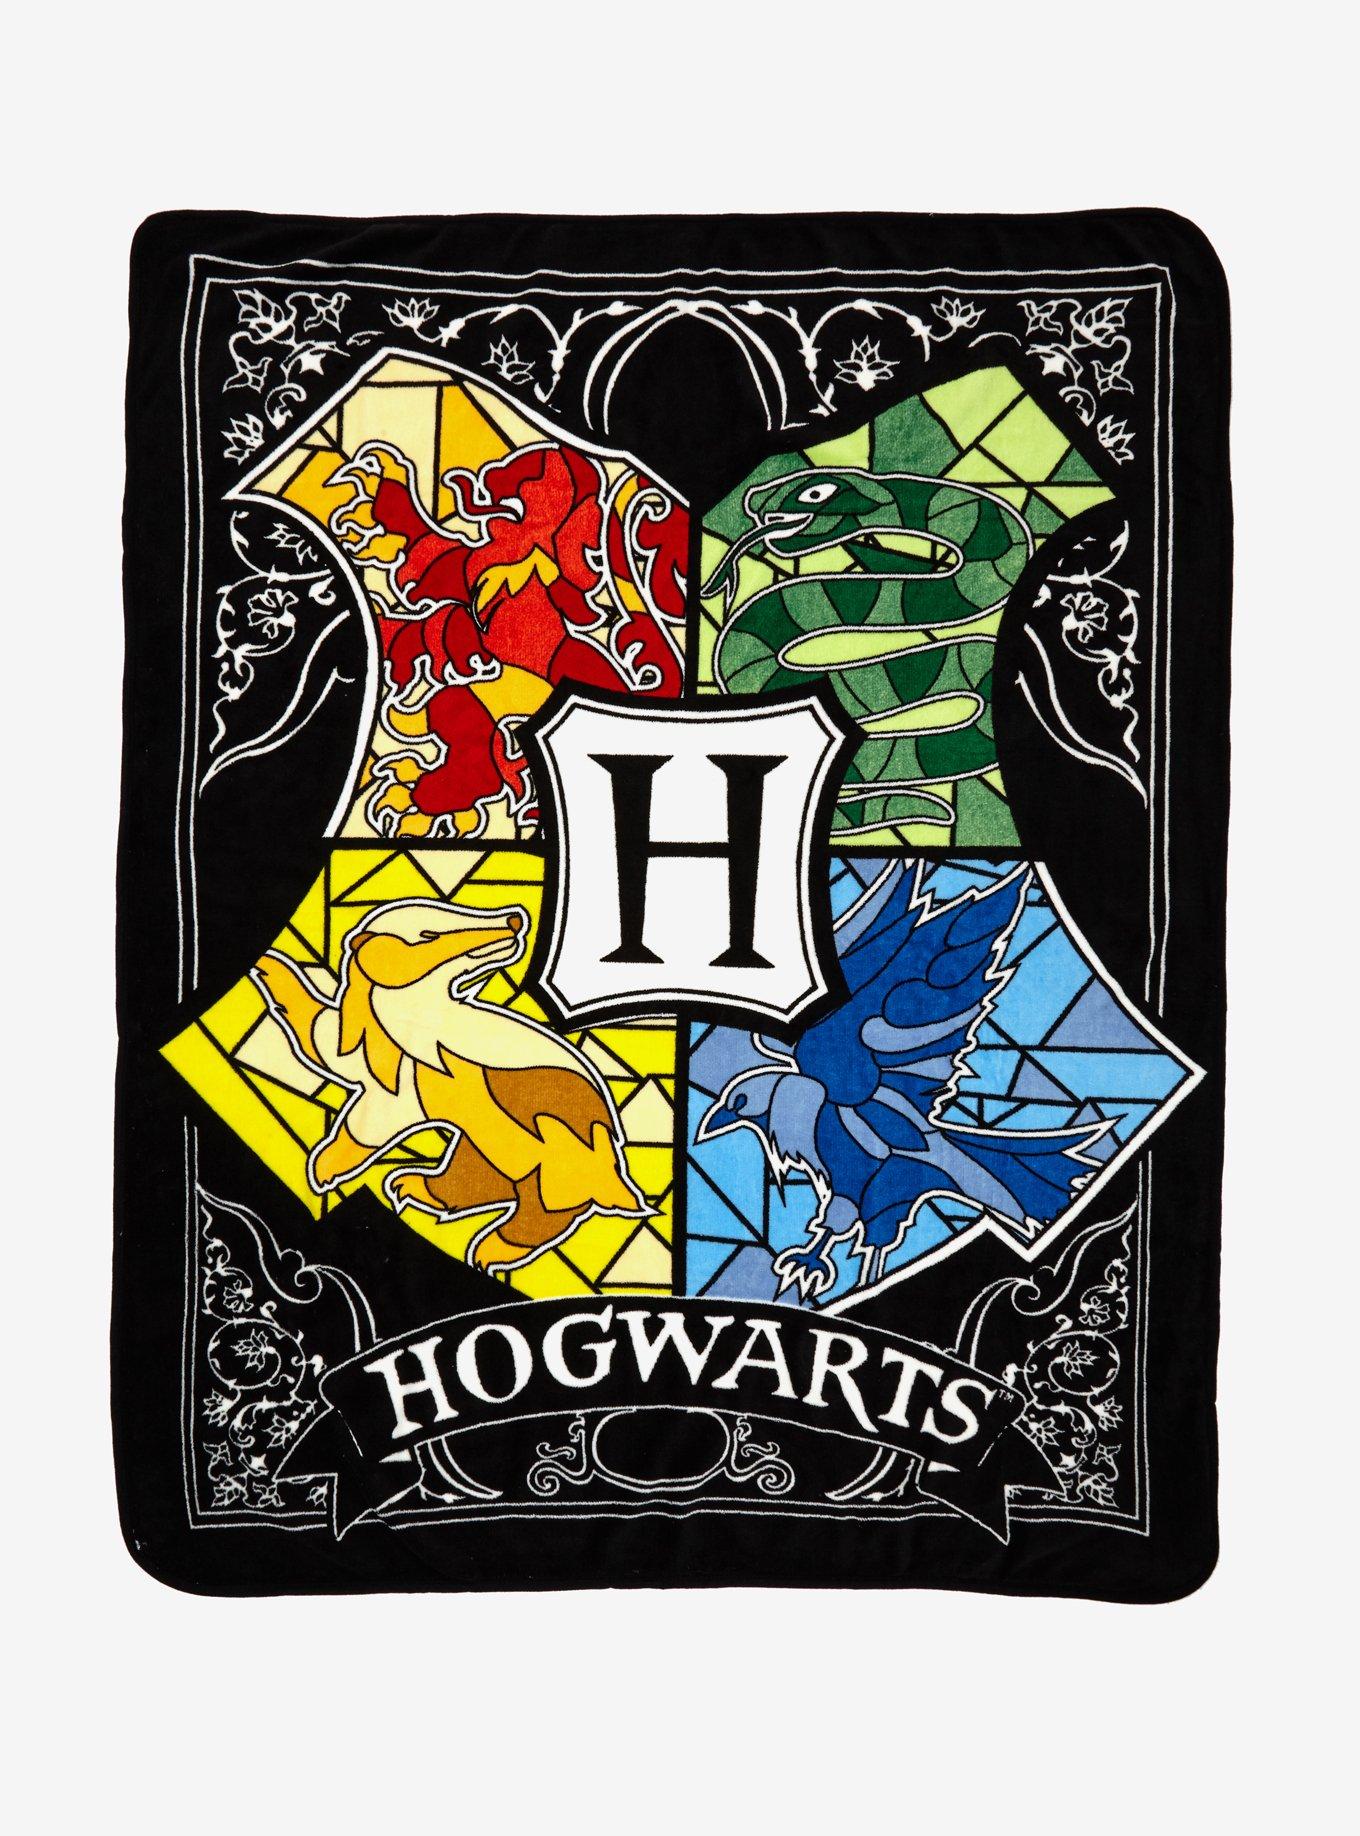 Harry Potter Stained Glass Crest Plush Throw Blanket, , hi-res